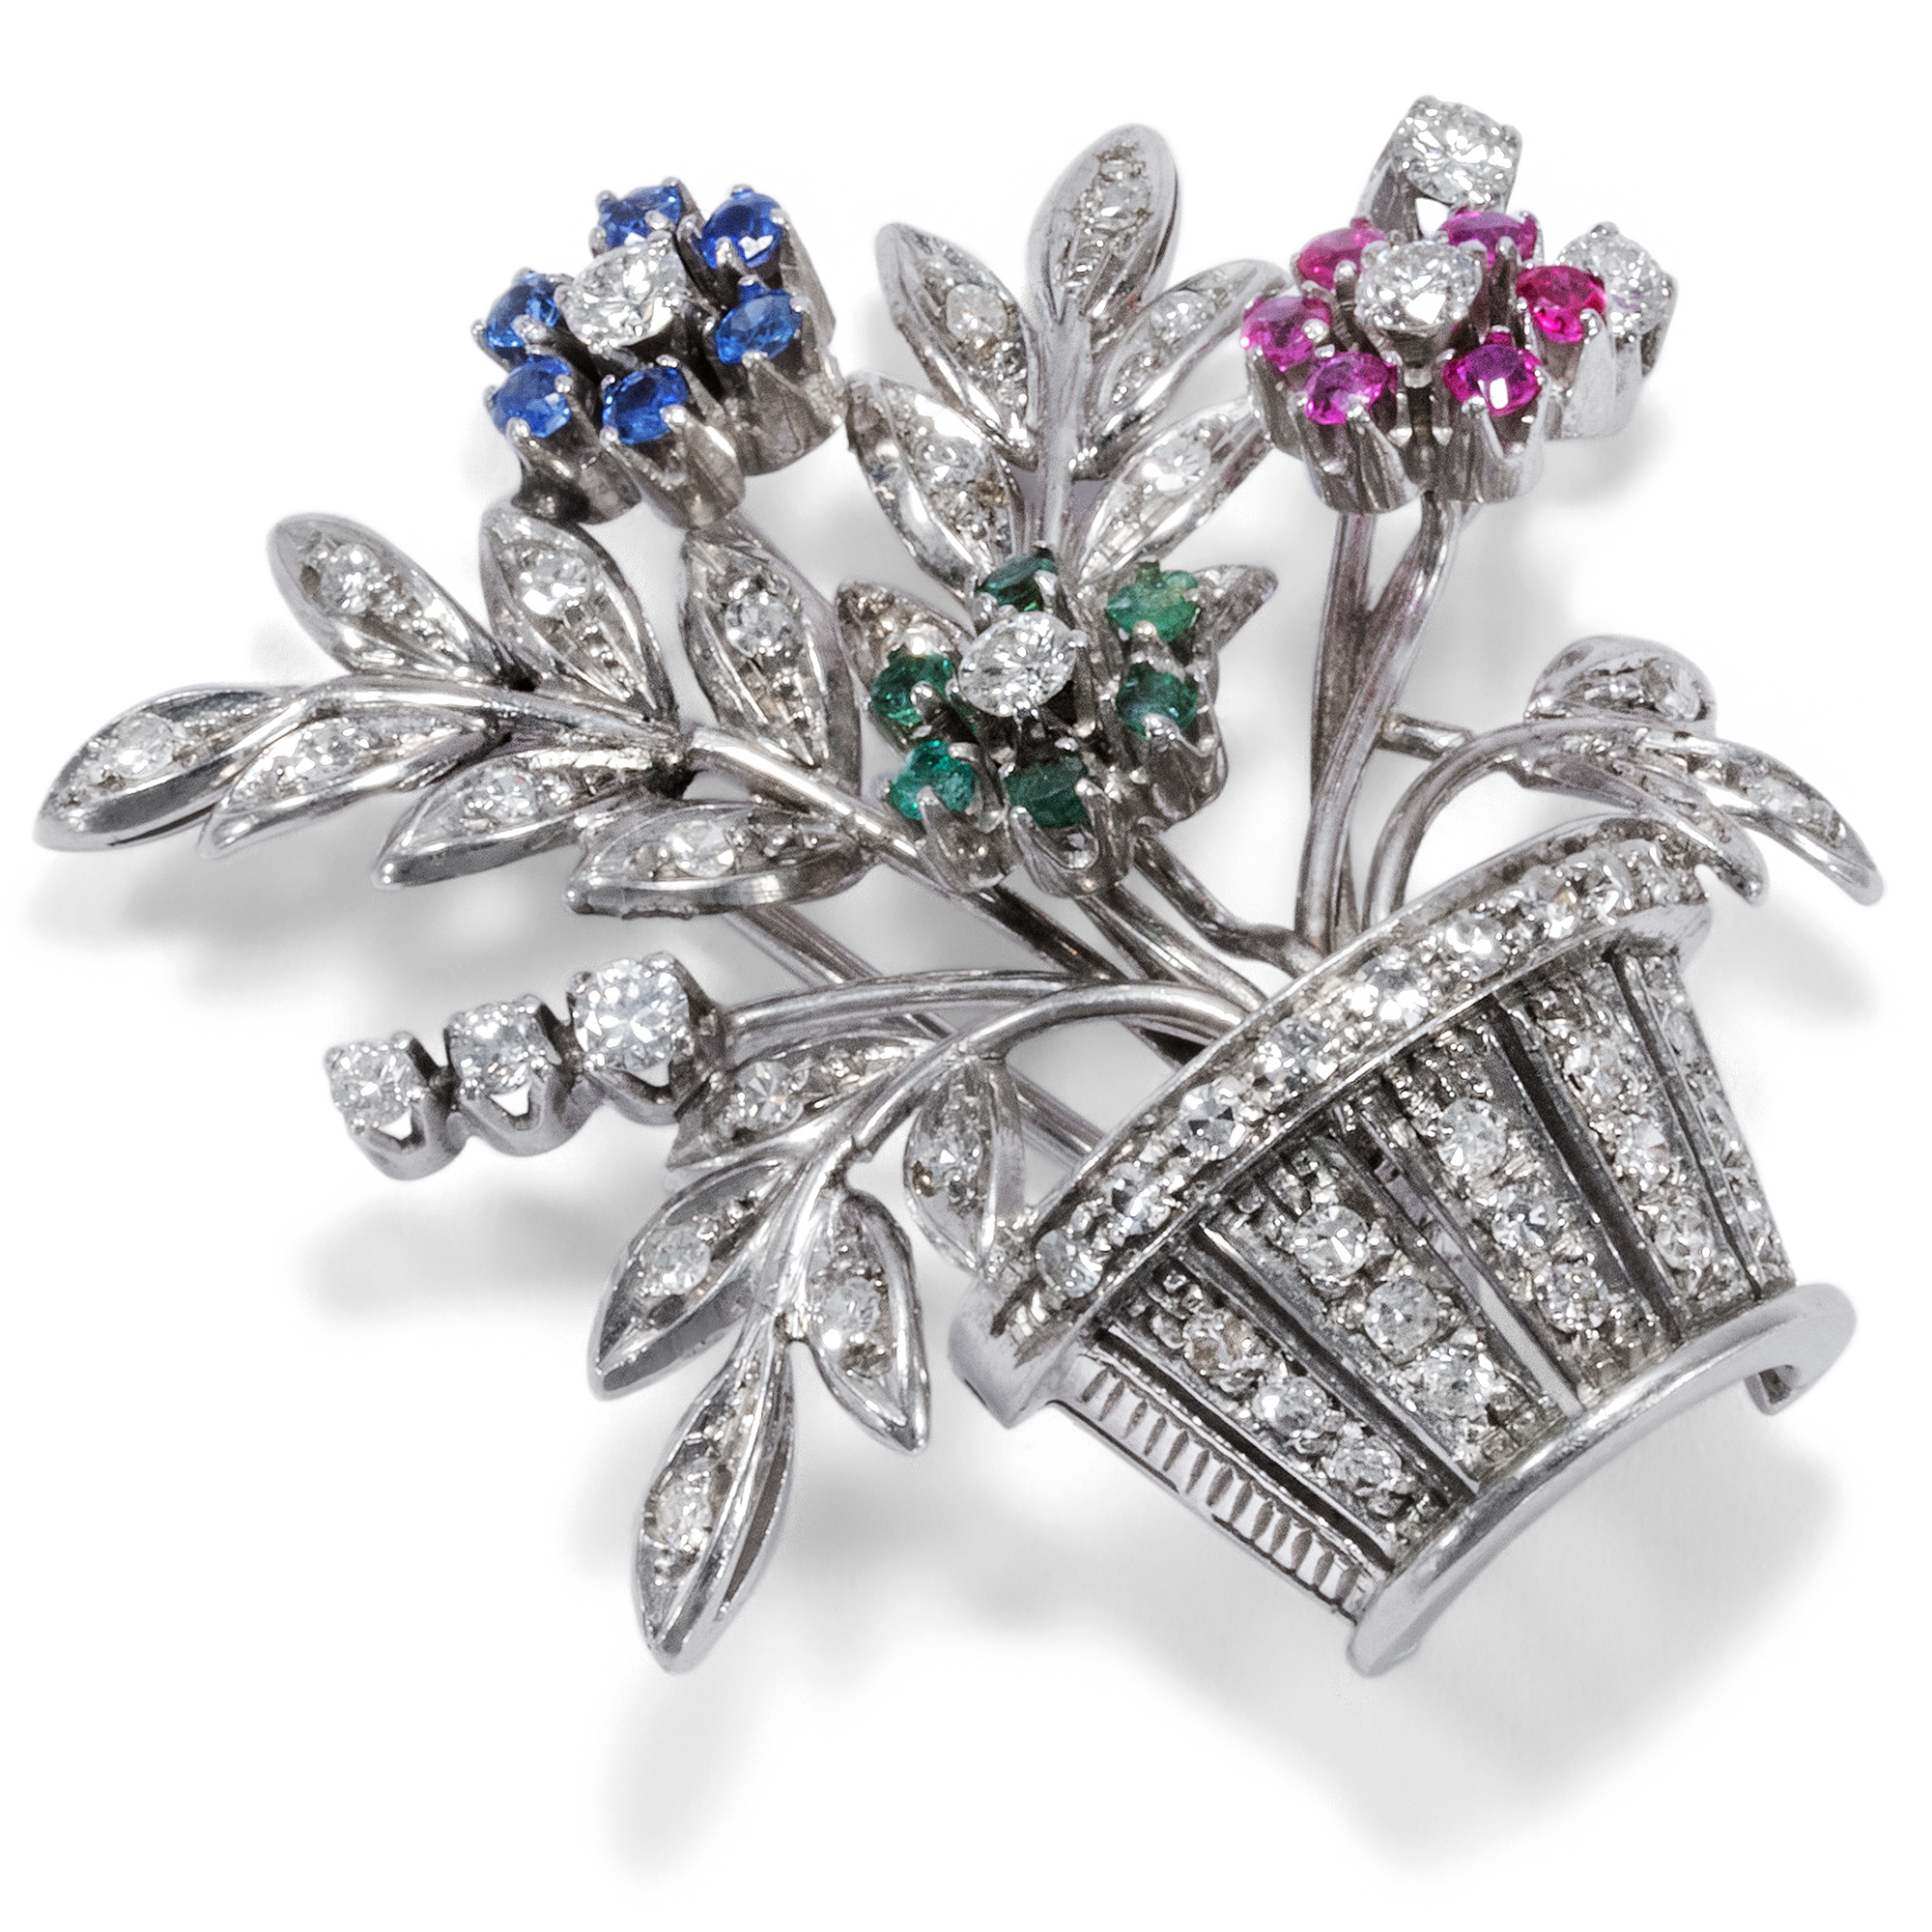 Luxurious White Gold Brooch With Rubies, Sapphires, Emeralds & Diamonds, Circa 1965